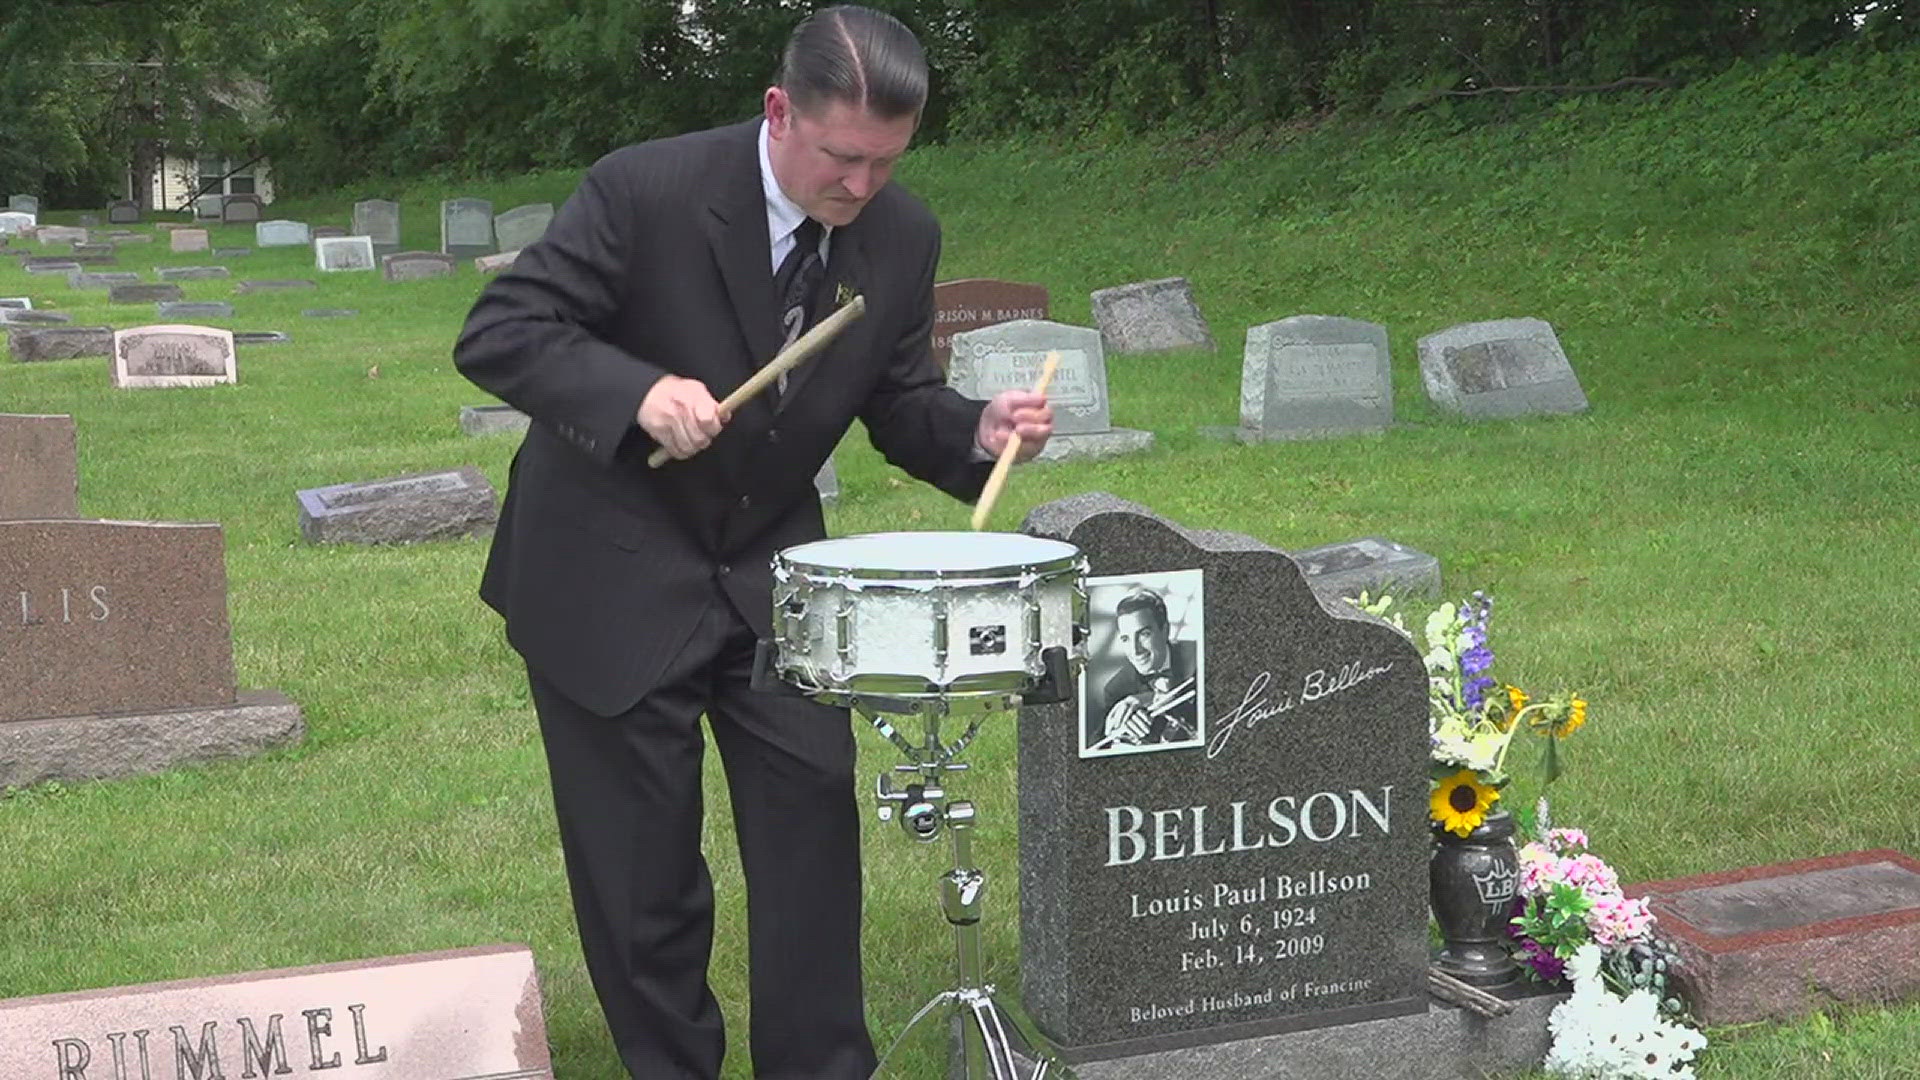 Bellson grew up in Moline and went on to make major innovations in jazz drumming.